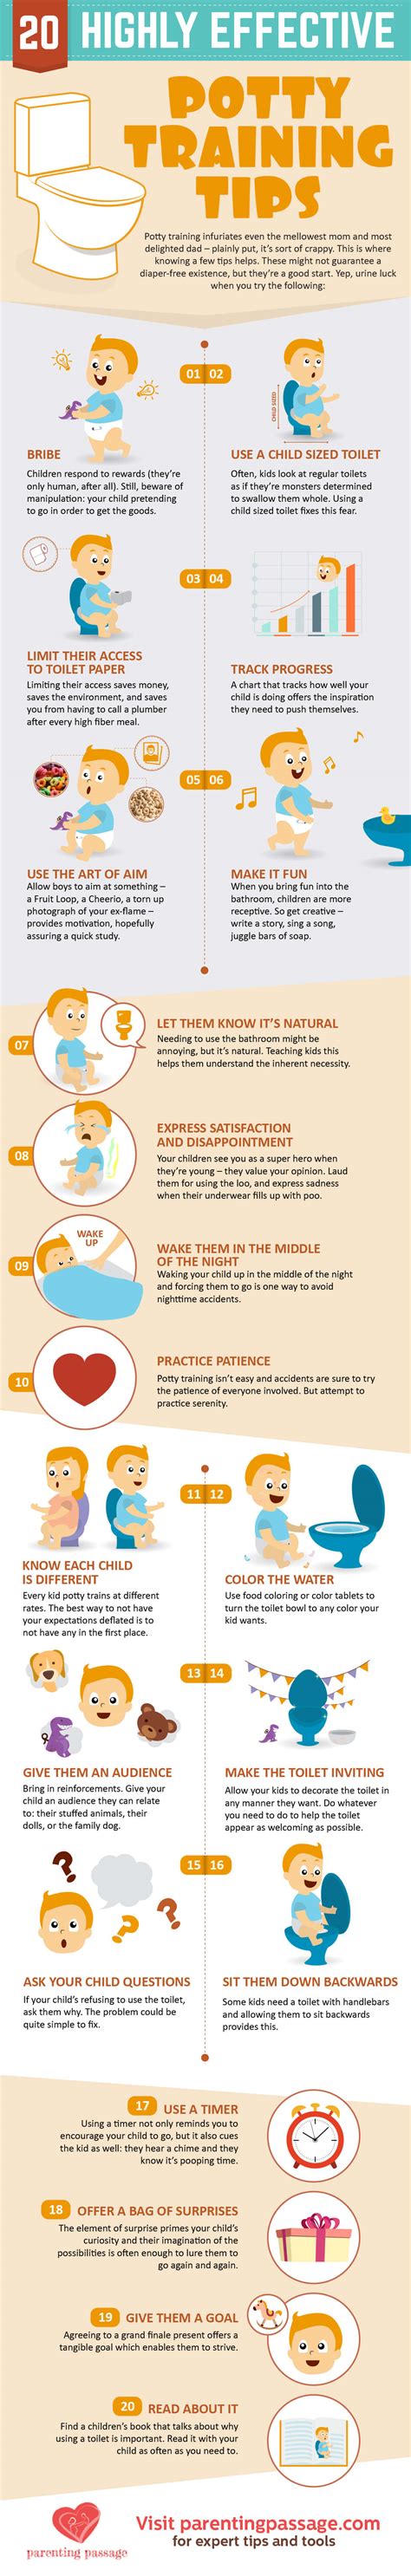 highly effective potty training tips